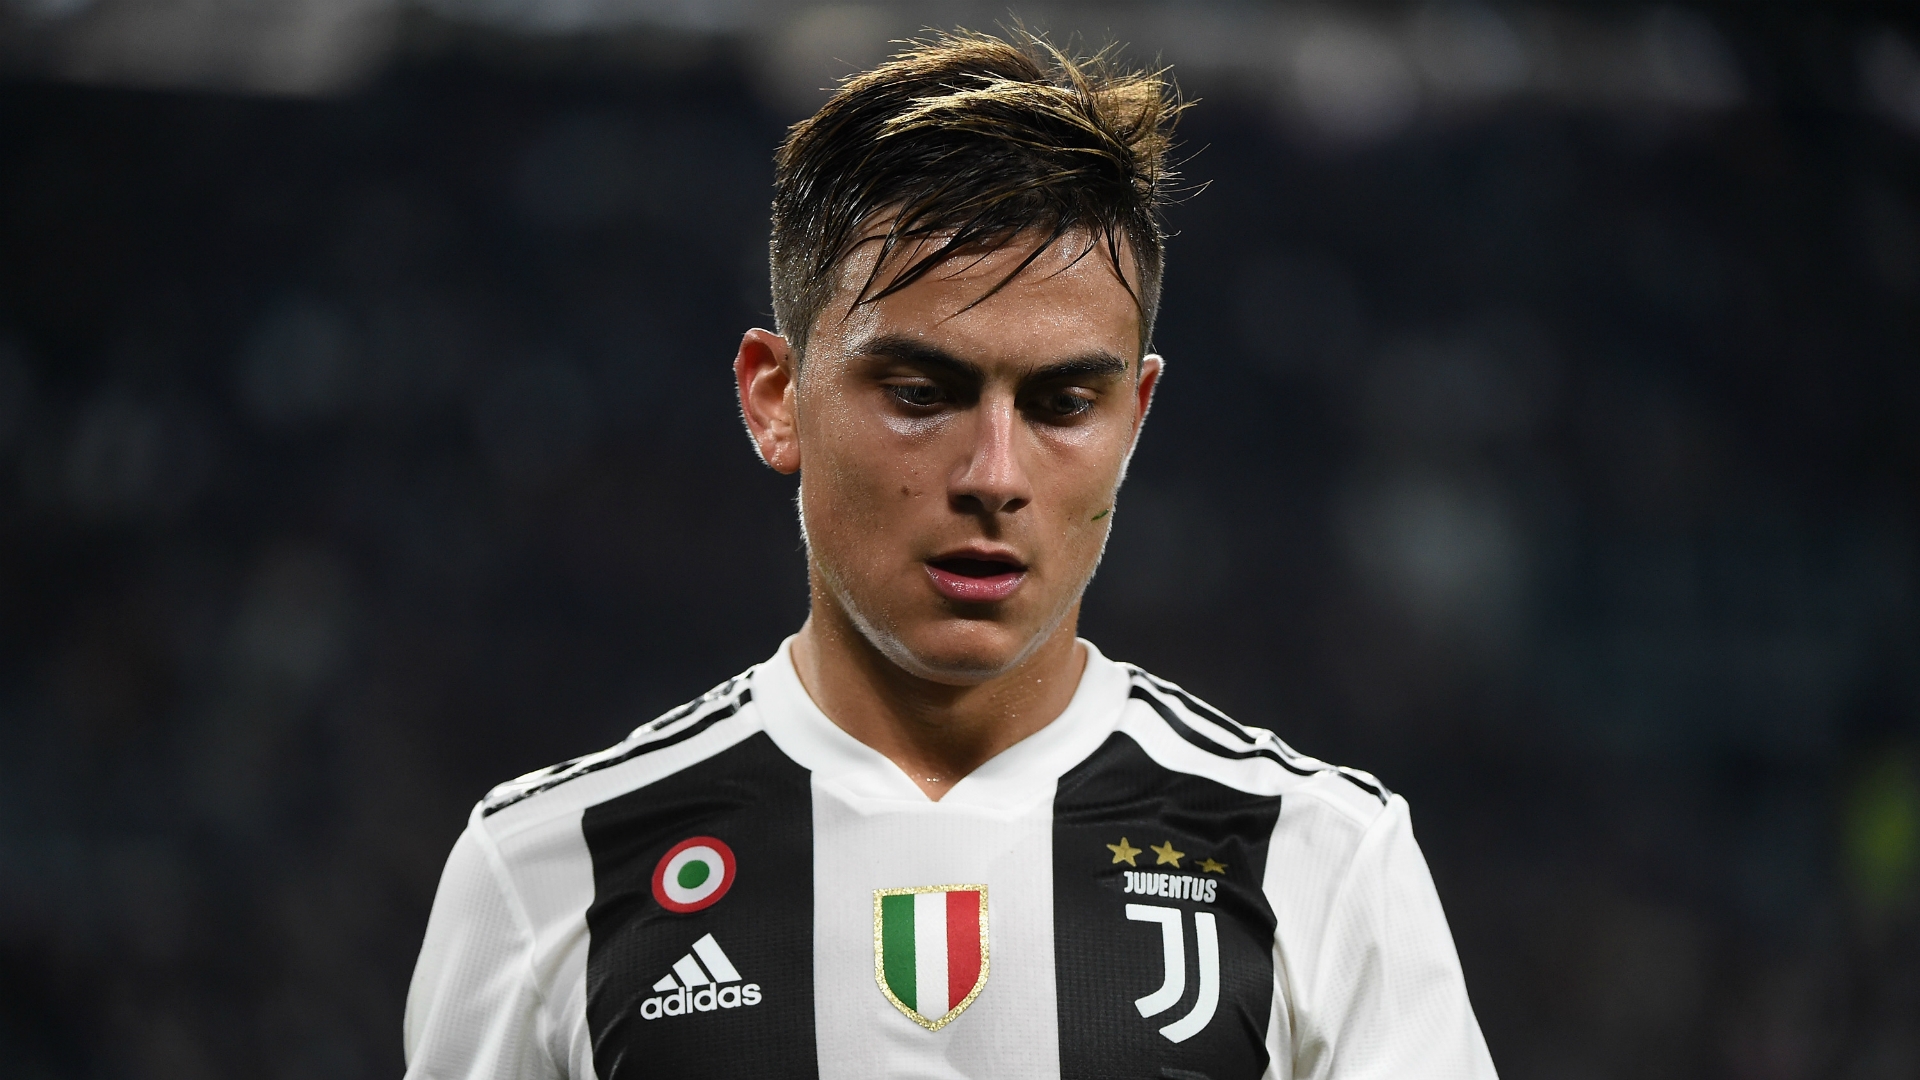 paulo dybala - juventus. The player is currently in talks with Real Madrid